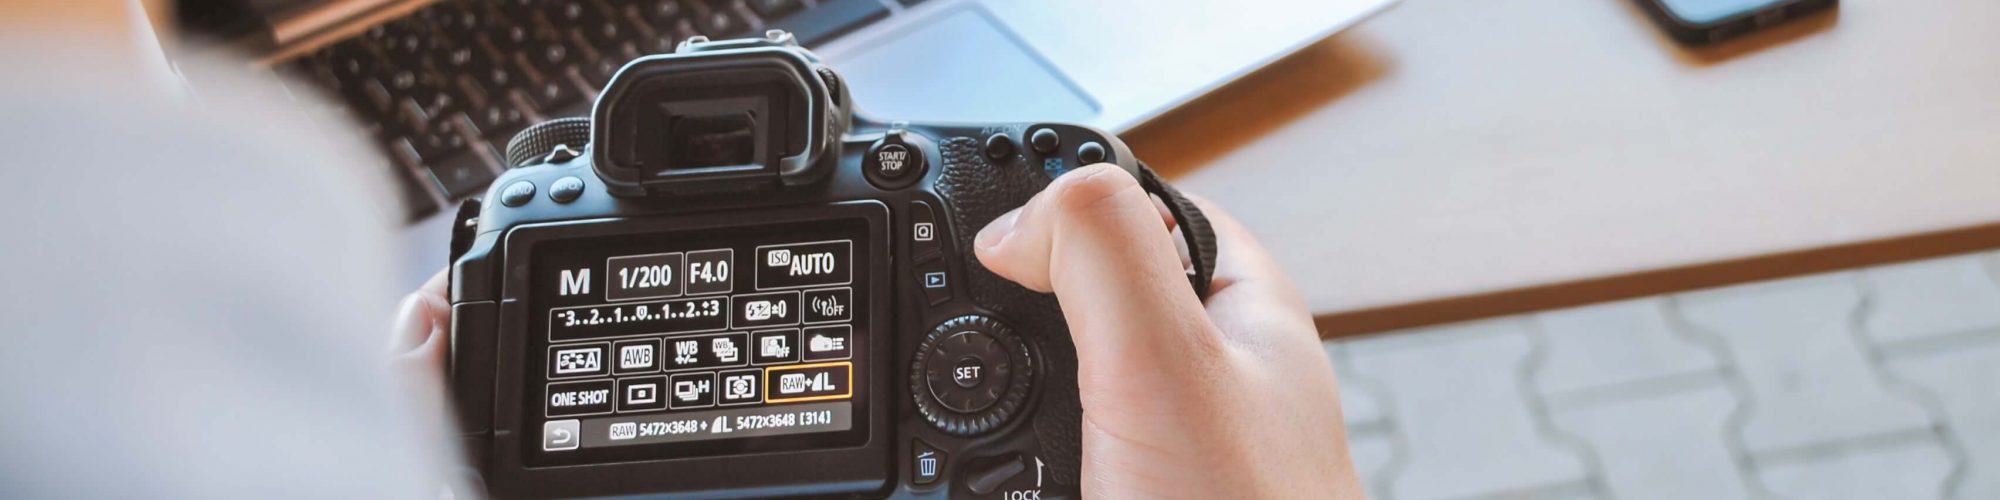 11 best sites to find freelance photography jobs | the jotform blog